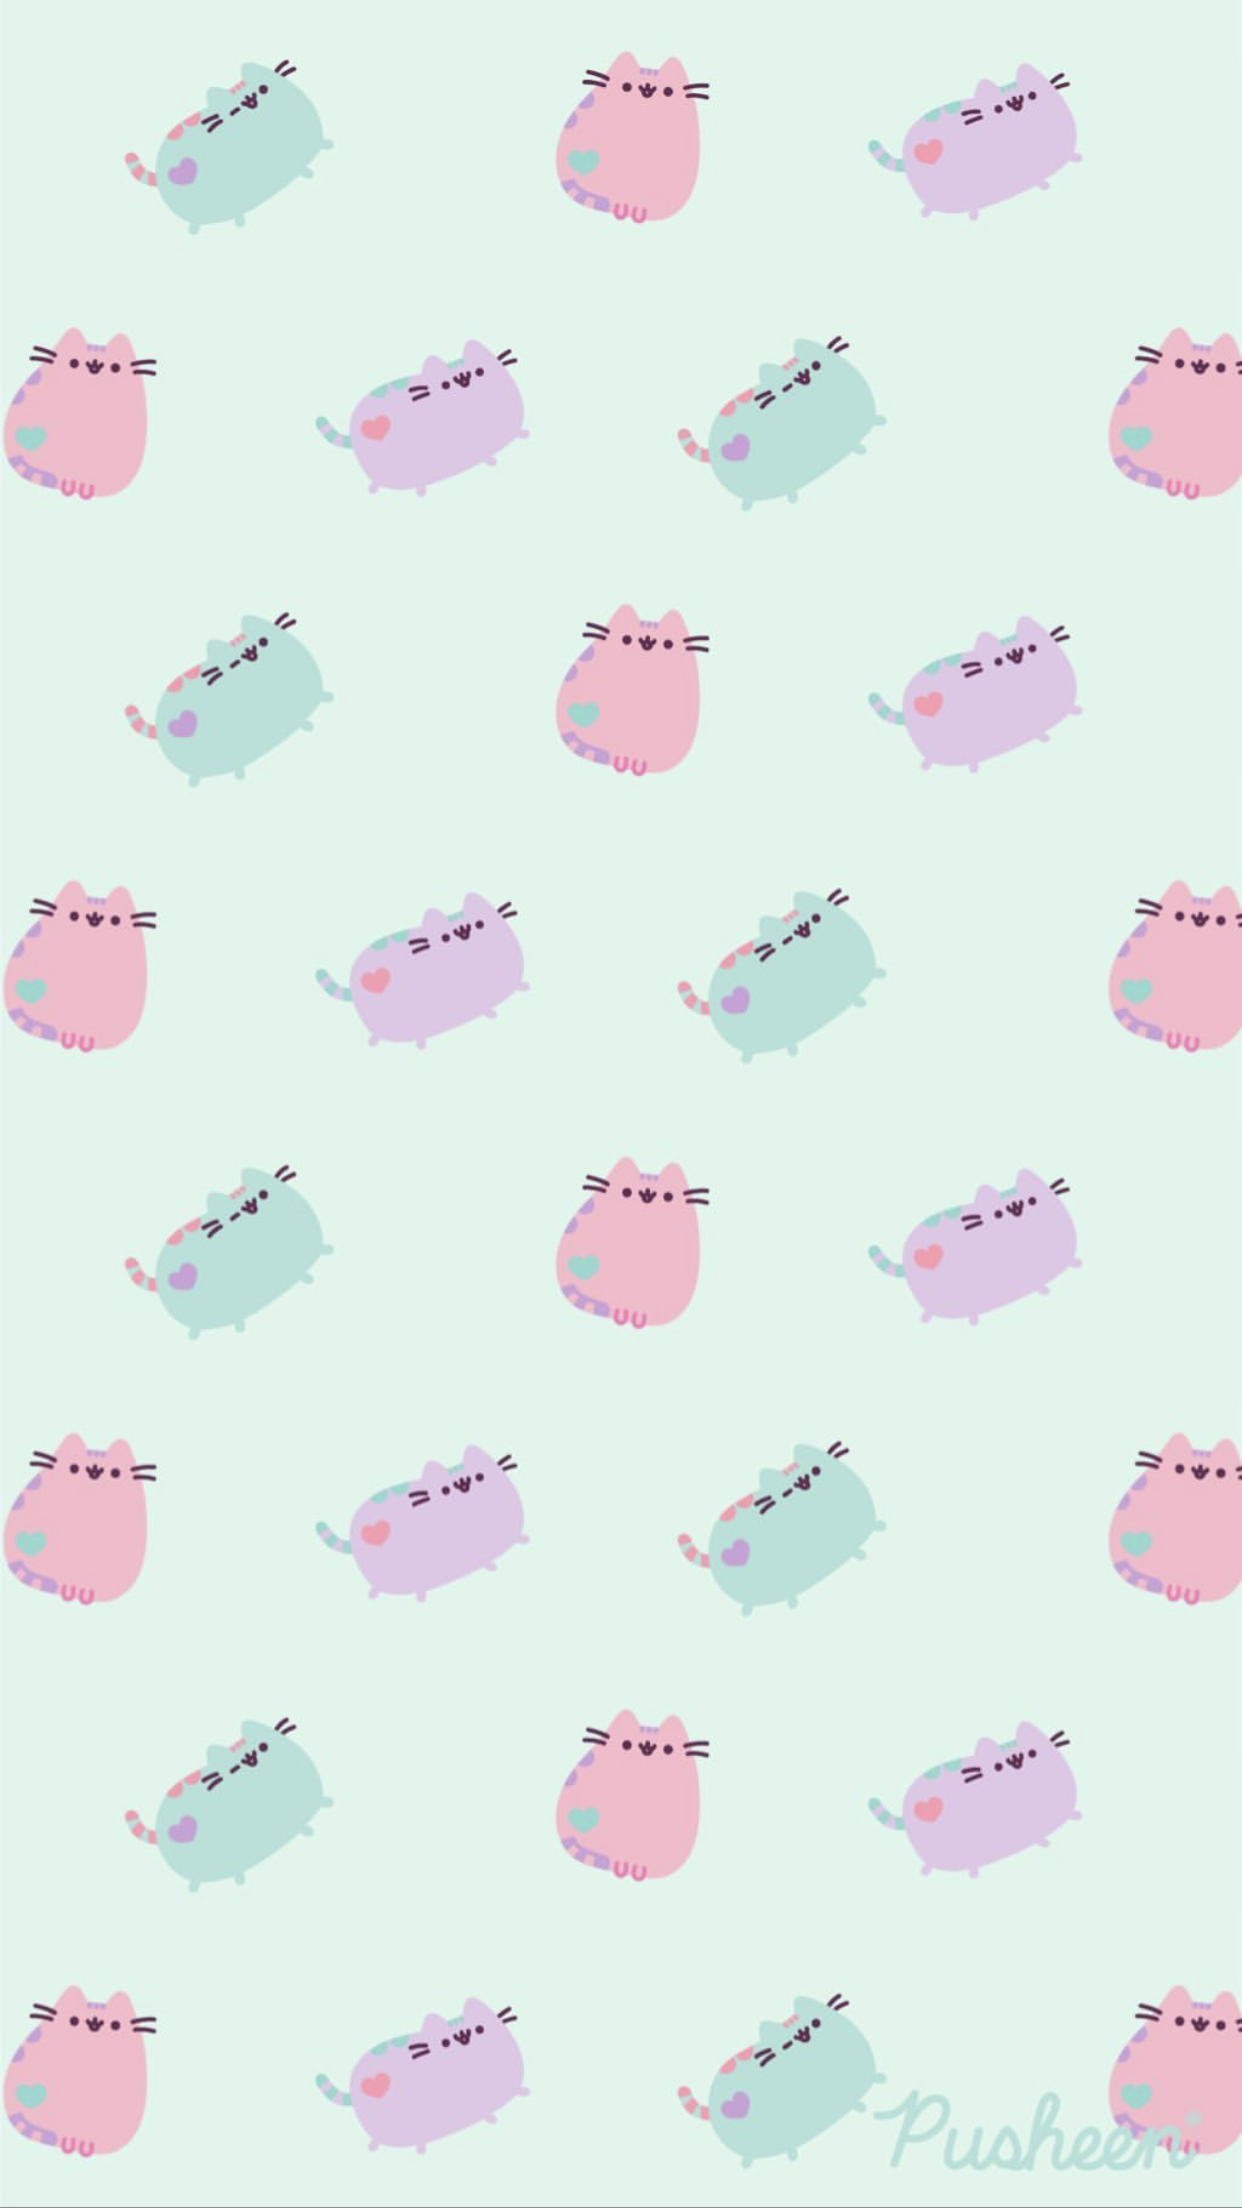 Pusheen the cat floral pastels spring iphone wallpaper. Cute